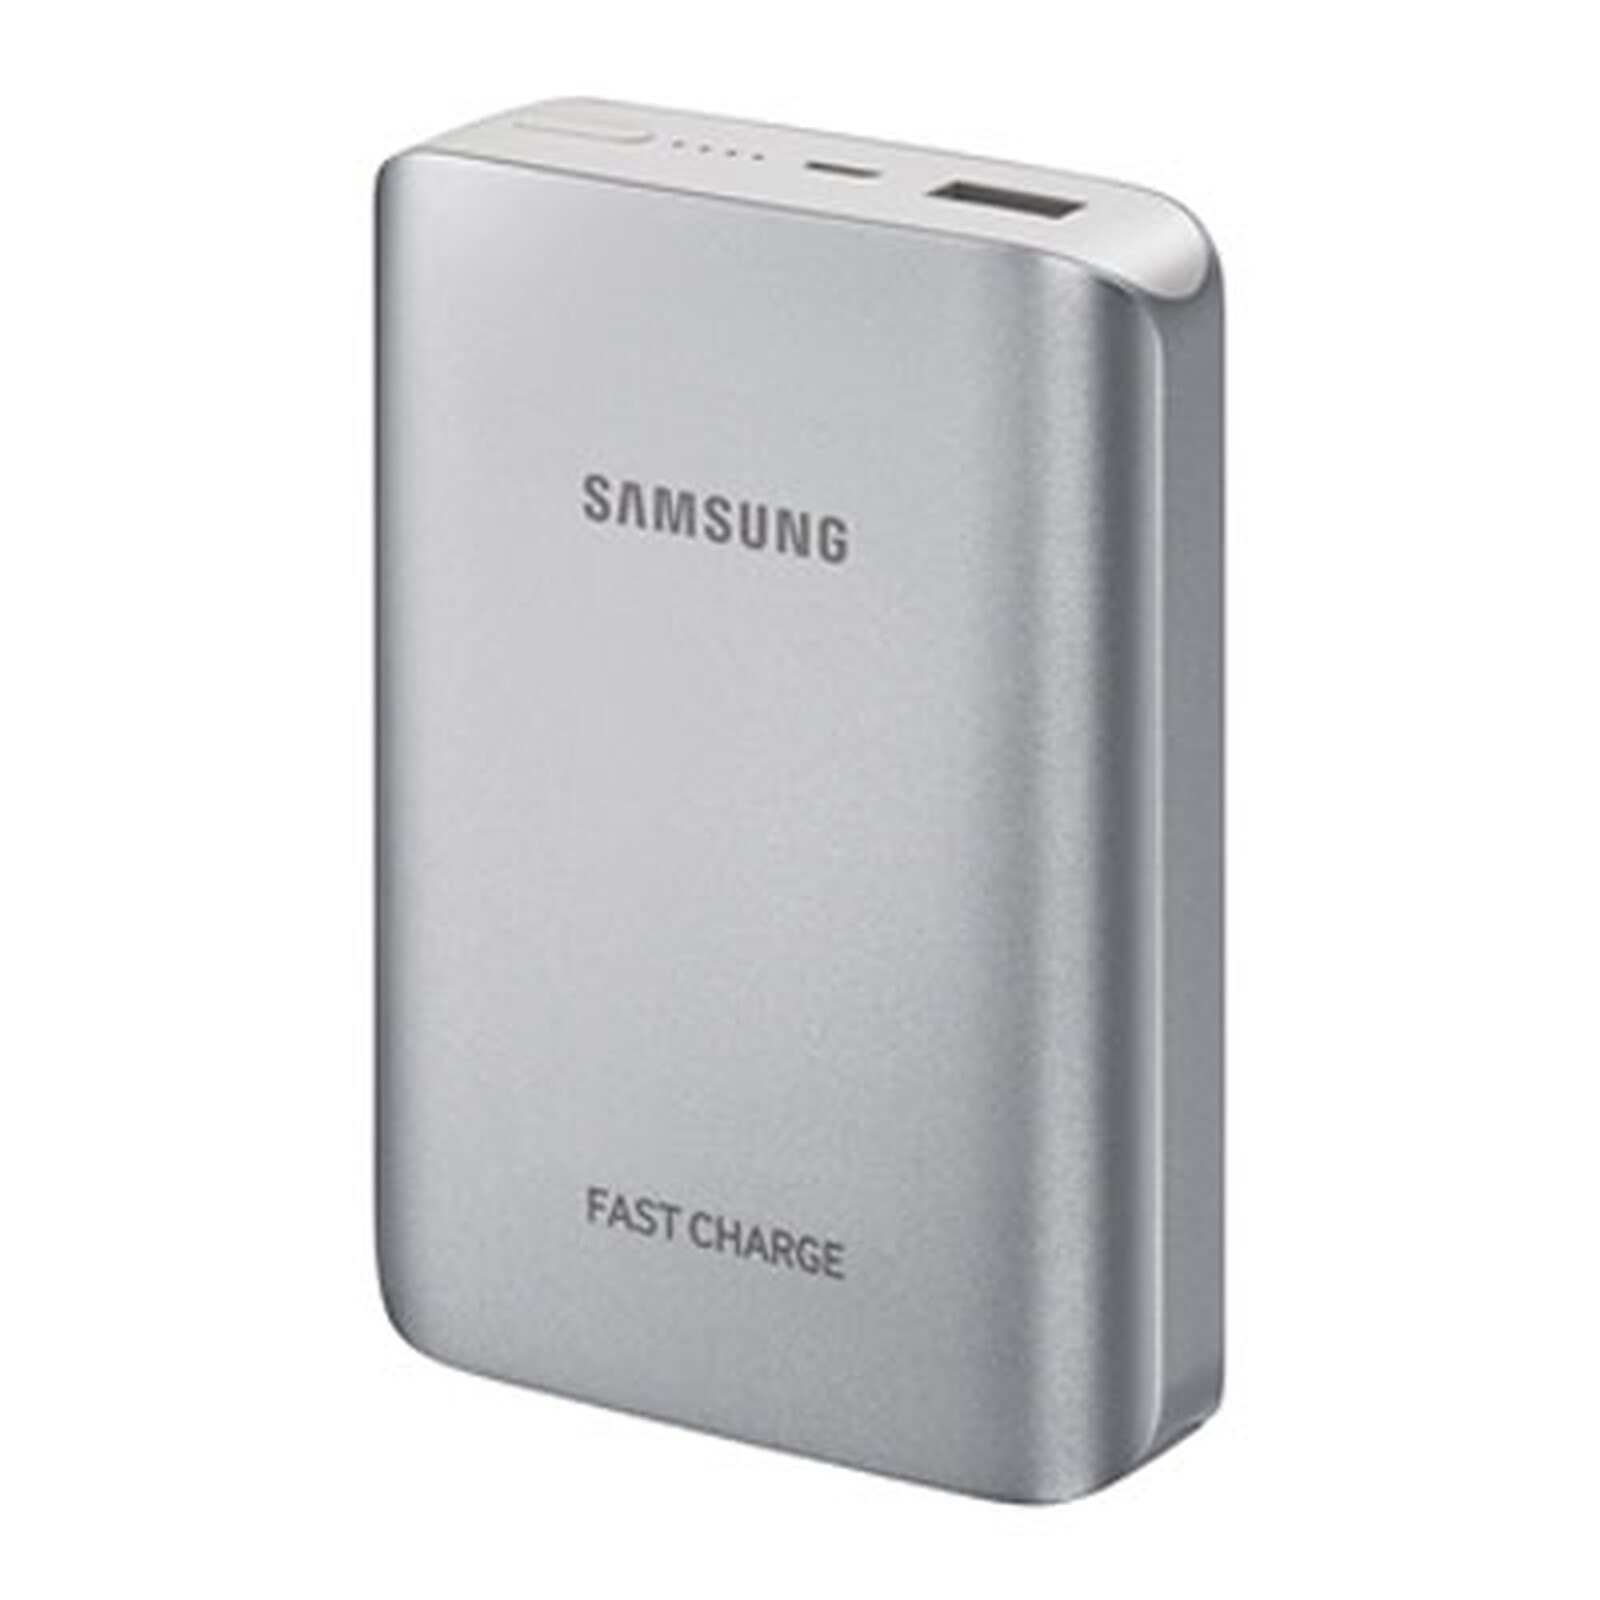 Samsung PowerBank Fast Charge Argent - Batterie externe - LDLC